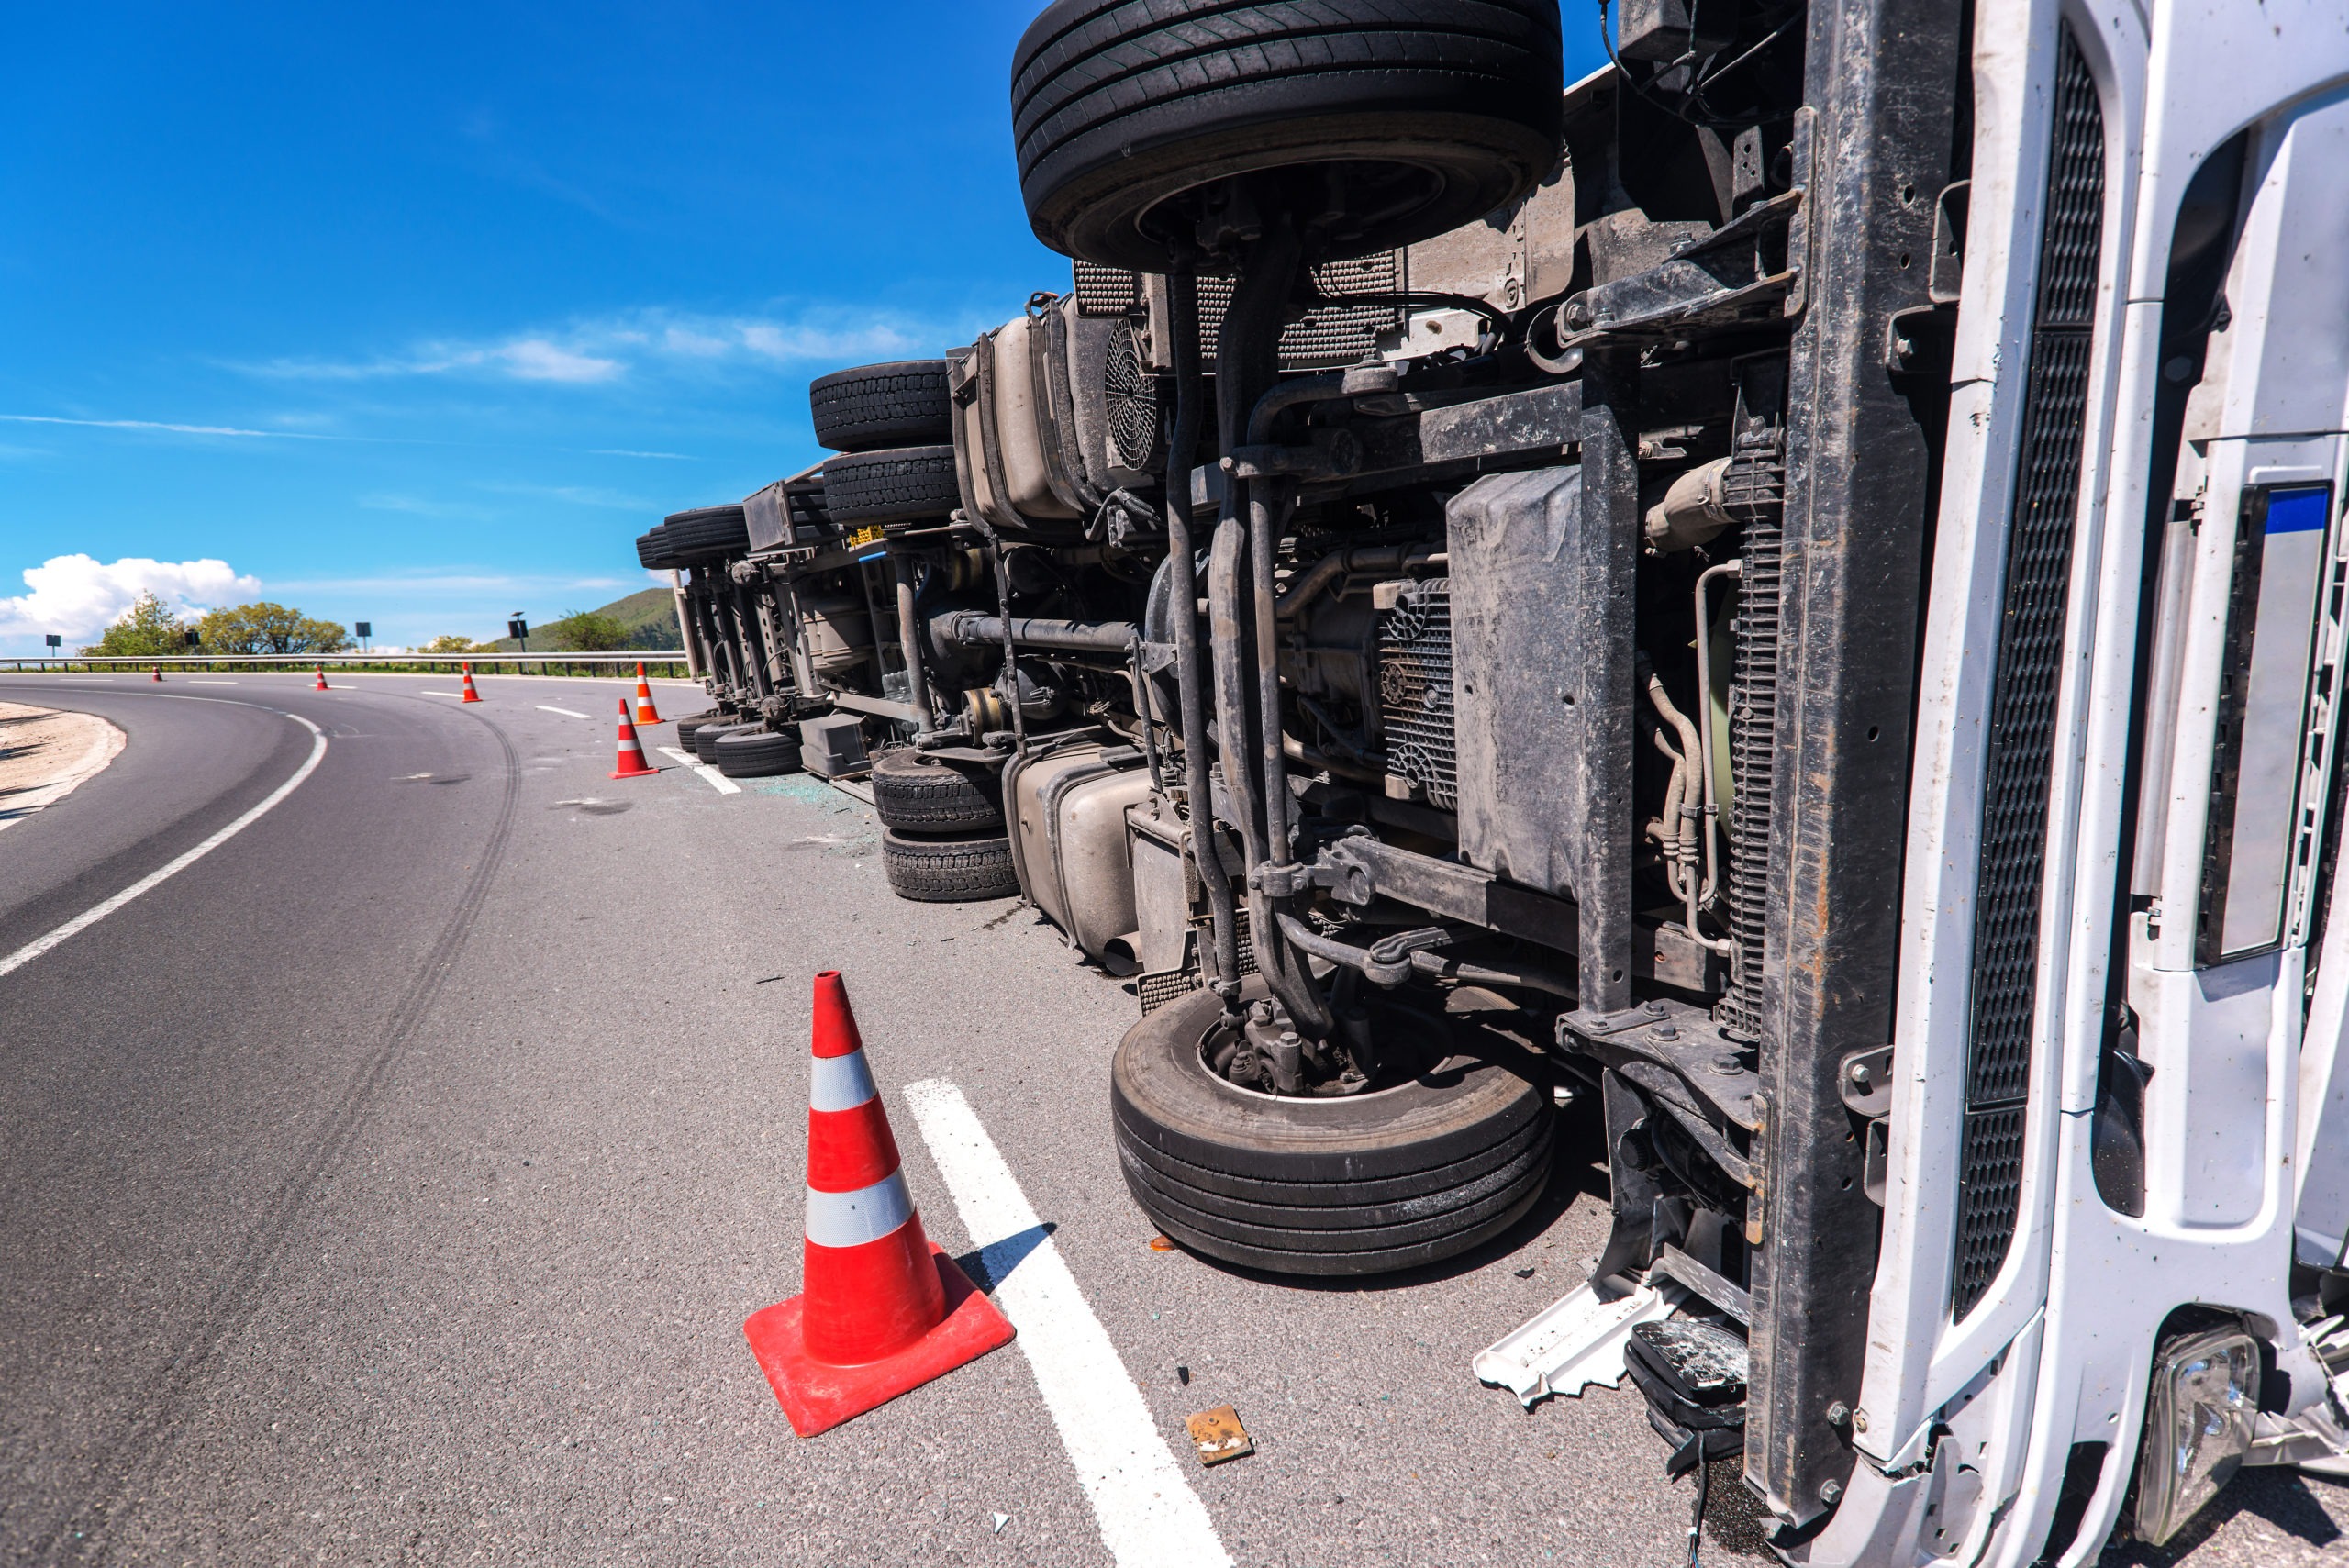 Truck Accident Lawyer In California